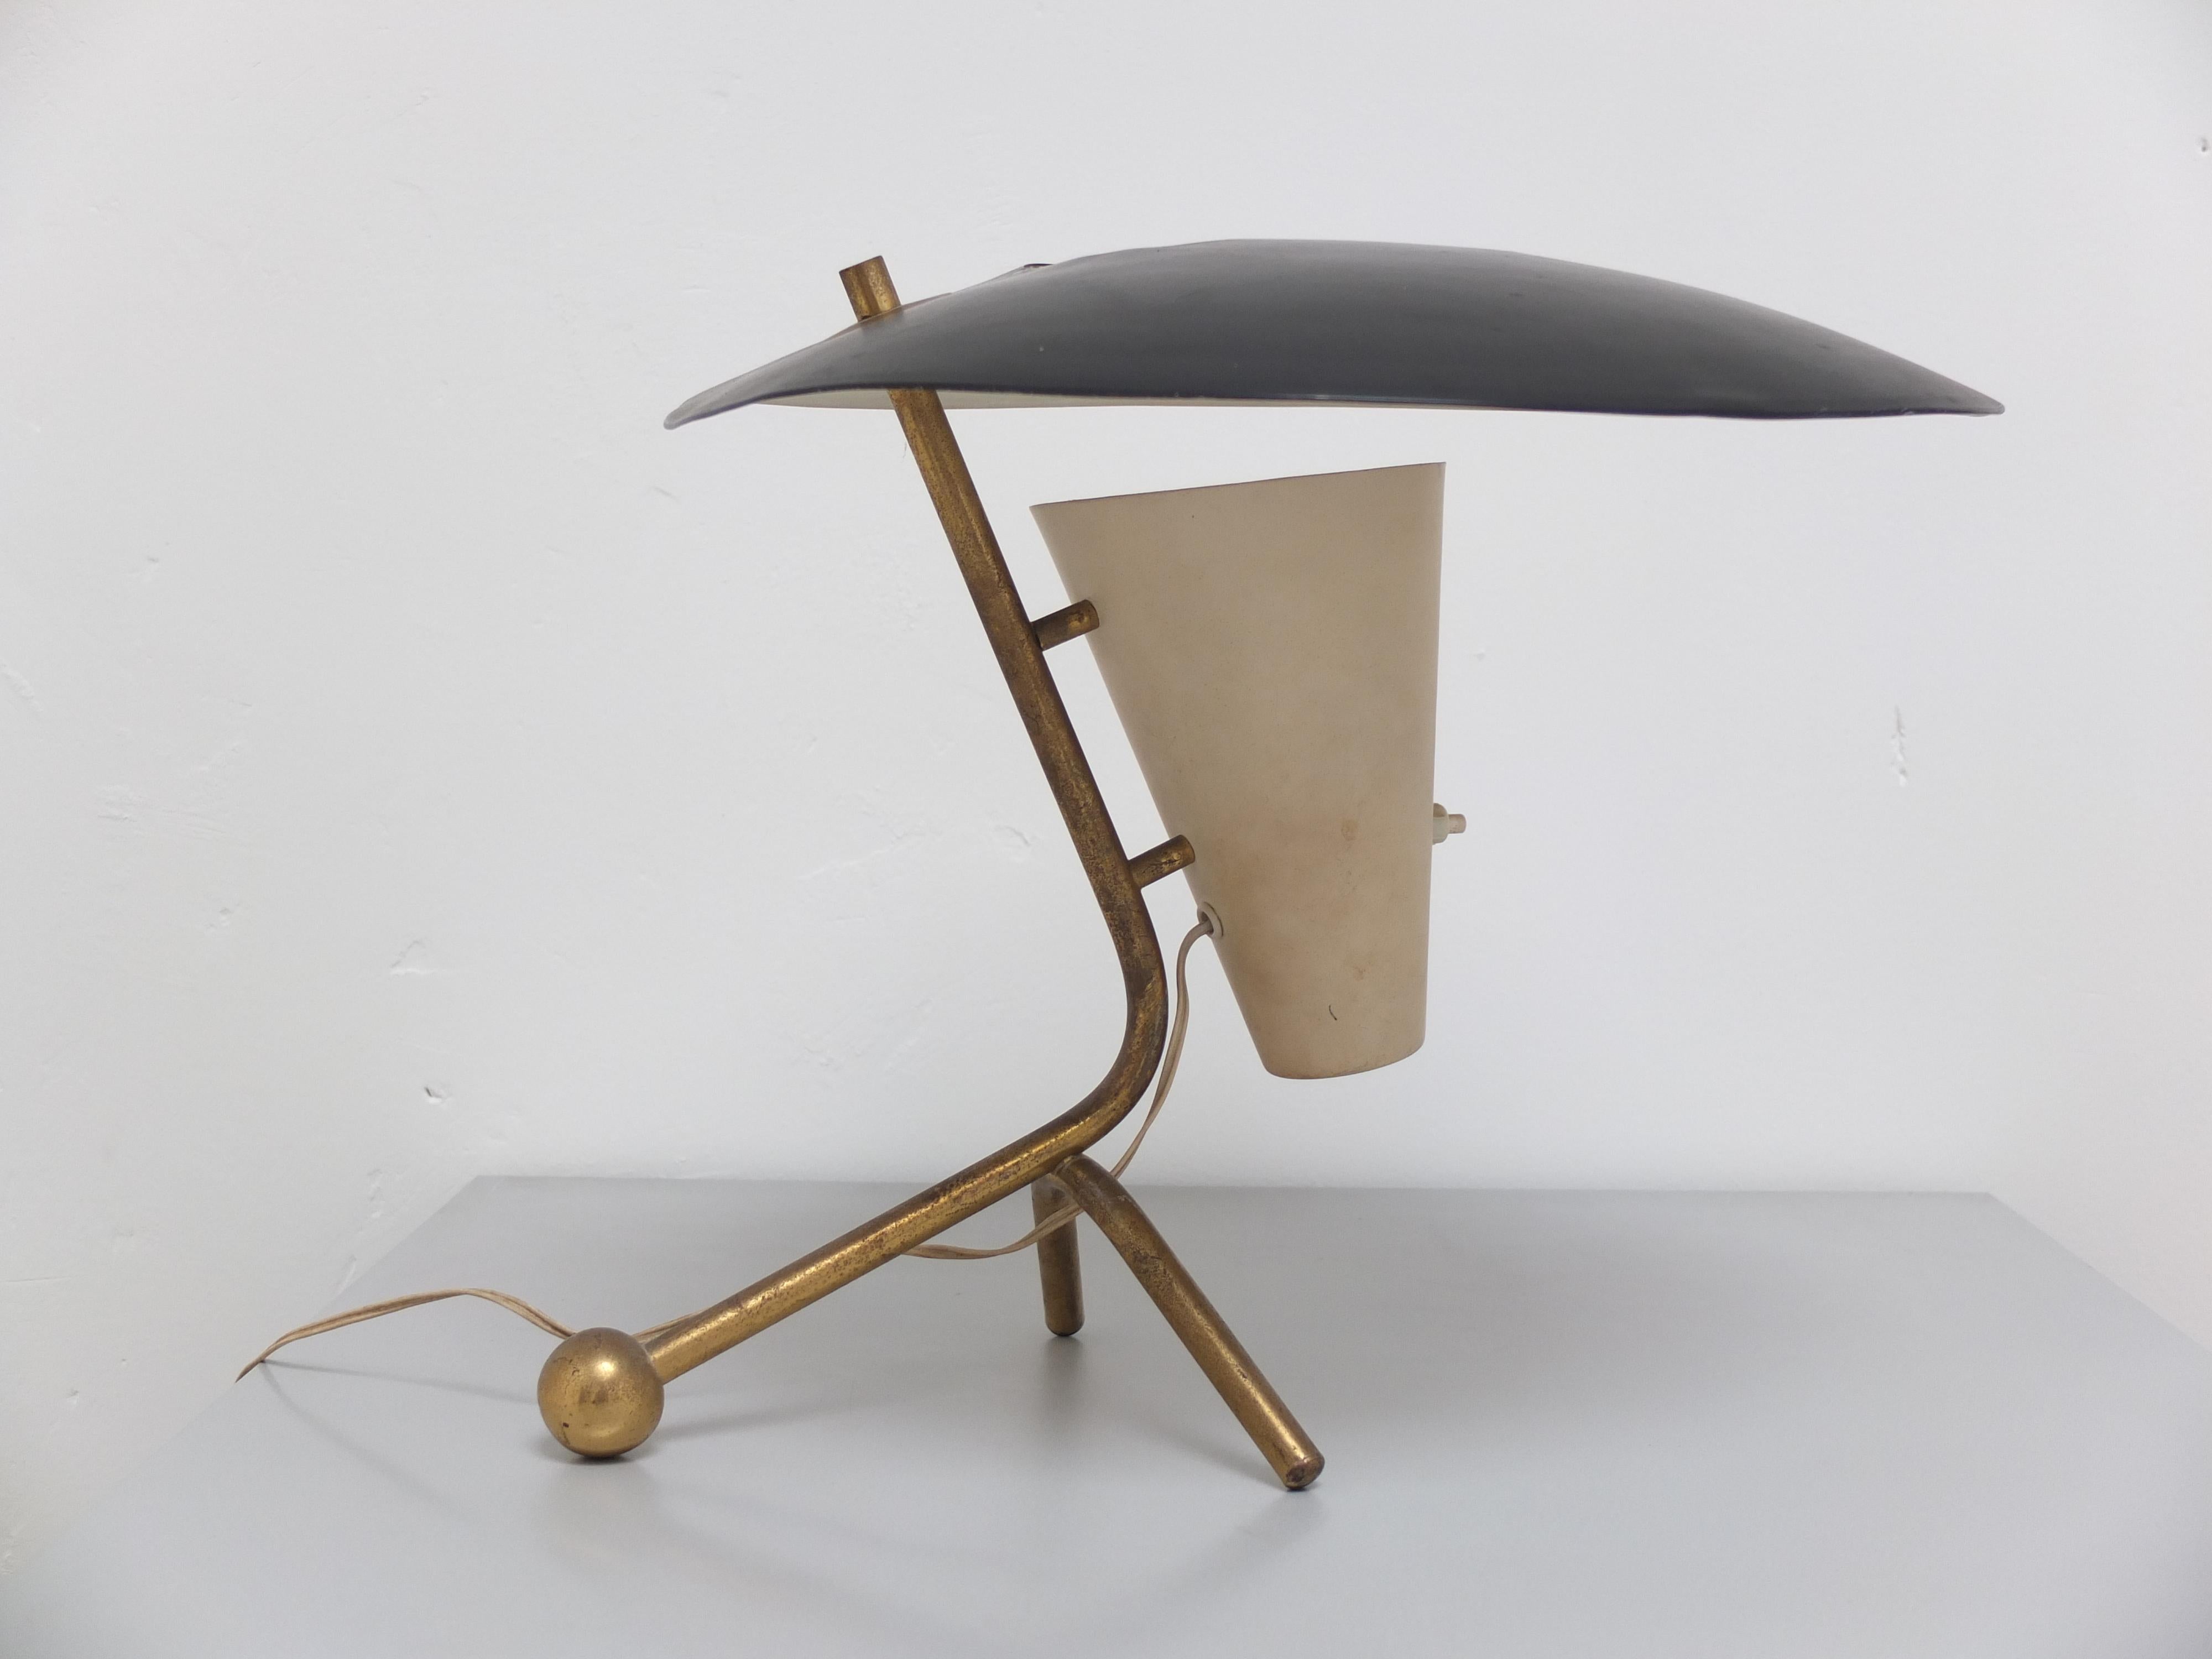 French Rare Desk Lamp by Pierre Guariche for Disderot, 1952